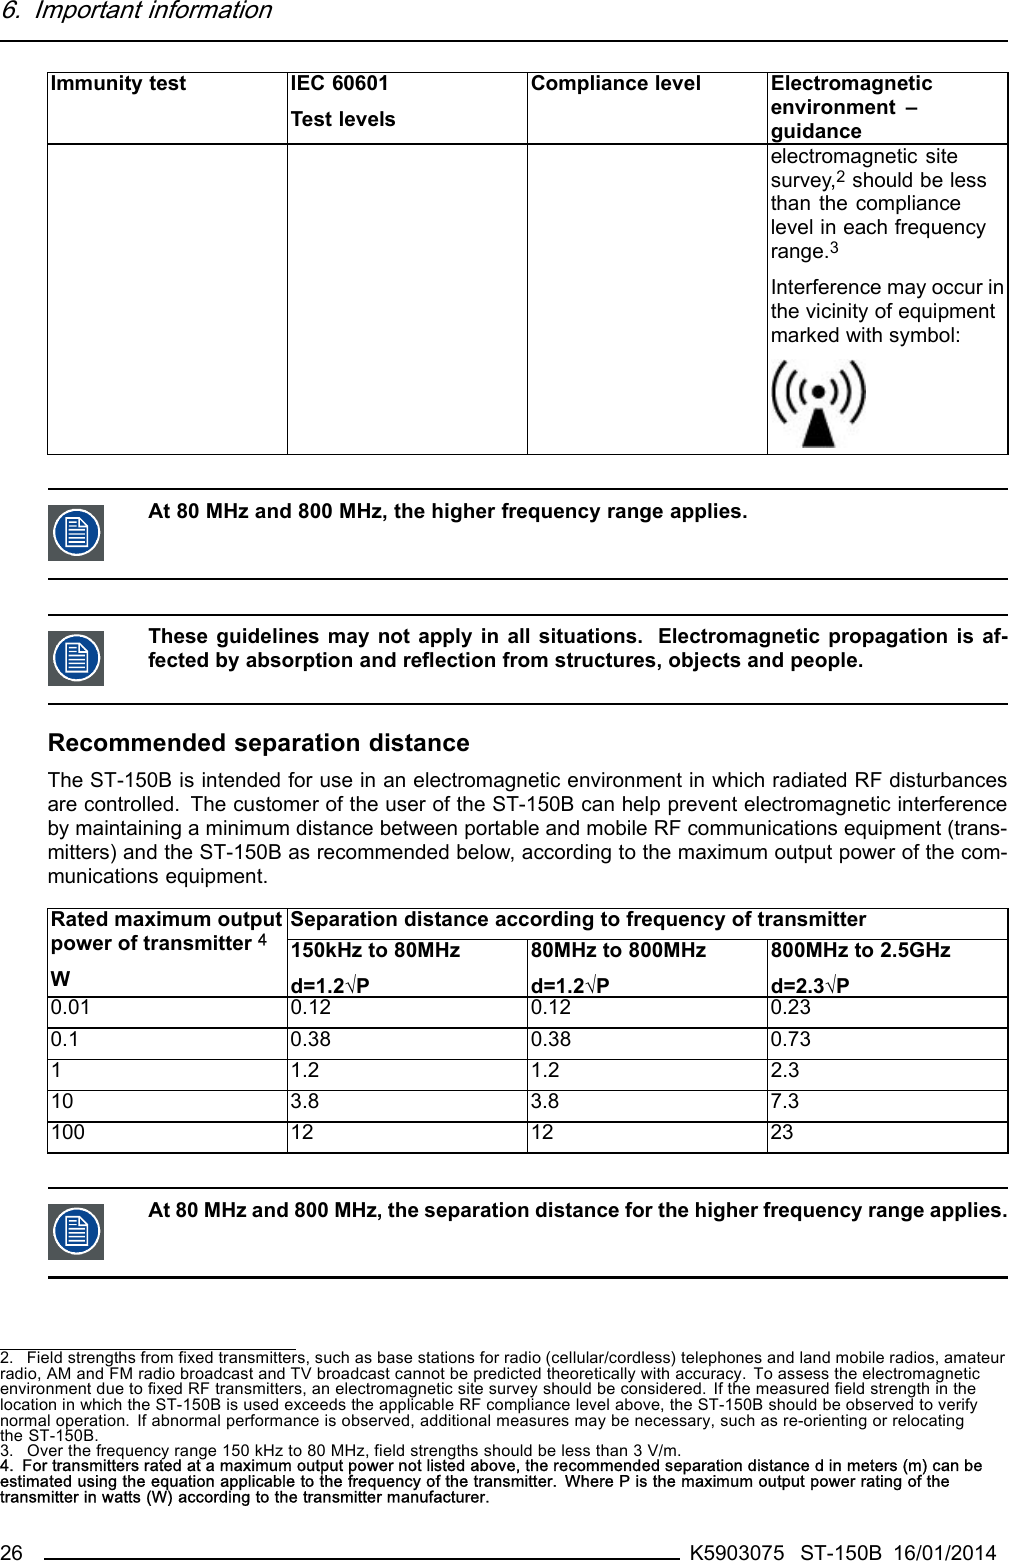 6. Important informationImmunity test IEC 60601Test levelsCompliance level Electromagneticenvironment –guidanceelectromagnetic sitesurvey,2should be lessthan the compliancelevel in each frequencyrange.3Interference may occur inthe vicinity of equipmentmarked with symbol:At 80 MHz and 800 MHz, the higher frequency range applies.These guidelines may not apply in all situations. Electromagnetic propagation is af-fected by absorption and reﬂection from structures, objects and people.Recommended separation distanceThe ST-150B is intended for use in an electromagnetic environment in which radiated RF disturbancesare controlled. The customer of the user of the ST-150B can help prevent electromagnetic interferenceby maintaining a minimum distance between portable and mobile RF communications equipment (trans-mitters) and the ST-150B as recommended below, according to the maximum output power of the com-munications equipment.Separation distance according to frequency of transmitterRated maximum outputpower of transmitter 4W150kHz to 80MHzd=1.2√P80MHz to 800MHzd=1.2√P800MHz to 2.5GHzd=2.3√P0.01 0.12 0.12 0.230.1 0.38 0.38 0.731 1.2 1.2 2.310 3.8 3.8 7.3100121223At 80 MHz and 800 MHz, the separation distance for the higher frequency range applies.2. Field strengths from fixed transmitters, such as base stations for radio (cellular/cordless) telephones and land mobile radios, amateurradio, AM and FM radio broadcast and TV broadcast cannot be predicted theoretically with accuracy. To assess the electromagneticenvironment due to fixed RF transmitters, an electromagnetic site survey should be considered. If the measured field strength in thelocation in which the ST-150B is used exceeds the applicable RF compliance level above, the ST-150B should be observed to verifynormal operation. If abnormal performance is observed, additional measures may be necessary, such as re-orienting or relocatingthe ST-150B.3. Over the frequency range 150 kHz to 80 MHz, field strengths should be less than3V/m.4. For transmitters rated at a maximum output power not listed above, the recommended separation distance d in meters (m) can beestimated using the equation applicable to the frequency of the transmitter. Where P is the maximum output power rating of thetransmitter in watts (W) according to the transmitter manufacturer.26 K5903075 ST-150B 16/01/2014